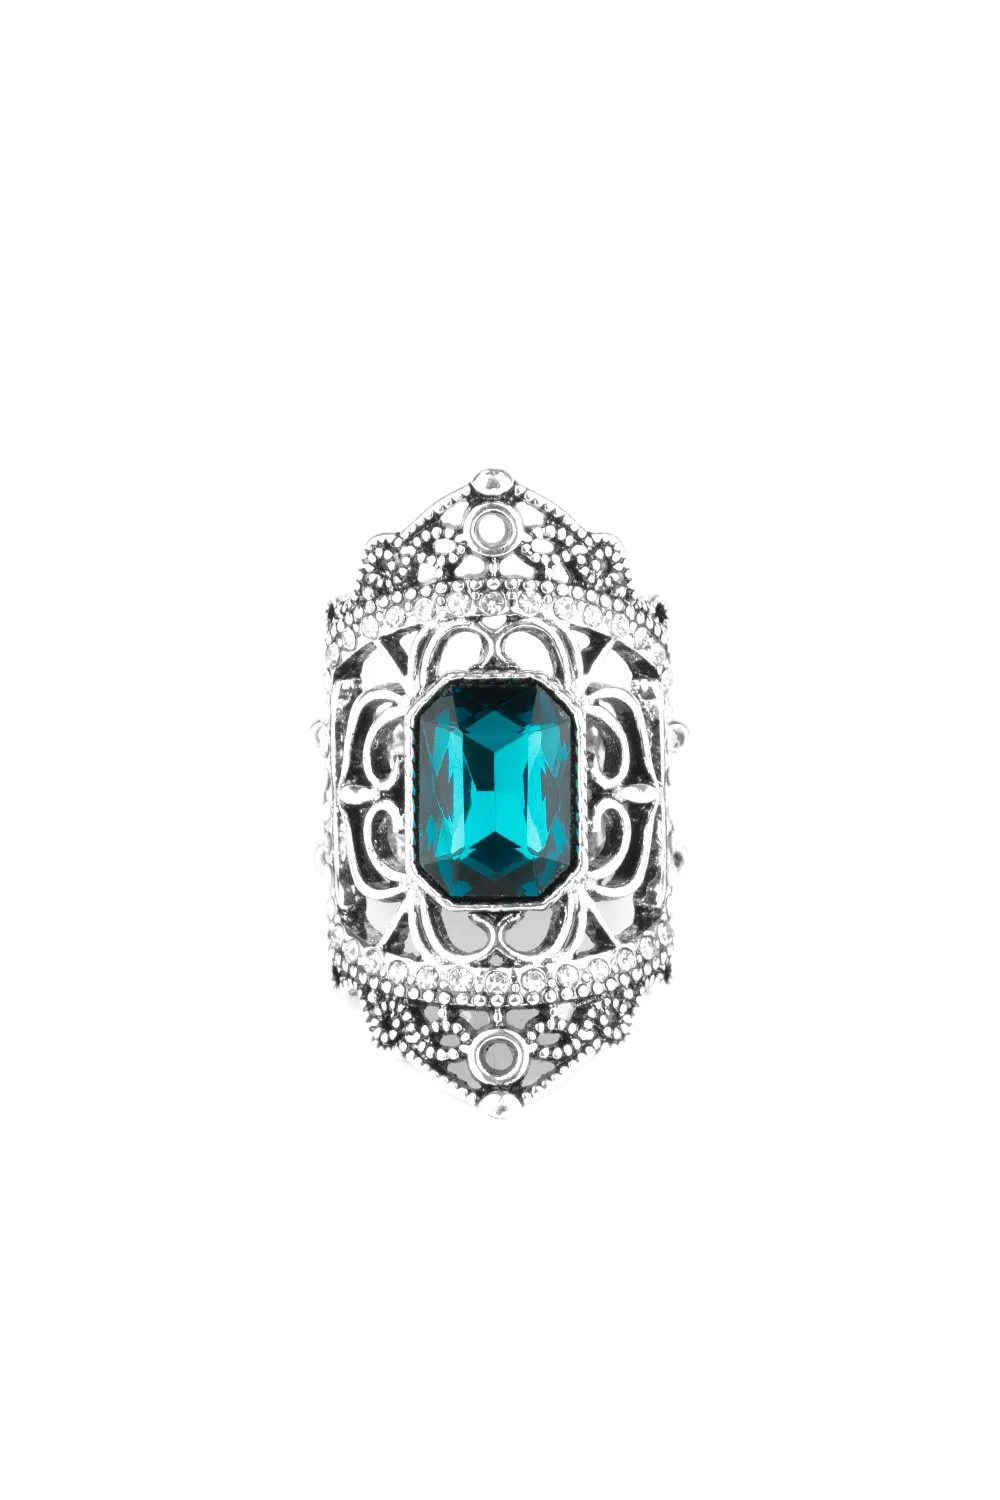 Primary image for Paparazzi Undefinable Dazzle Blue Ring - New